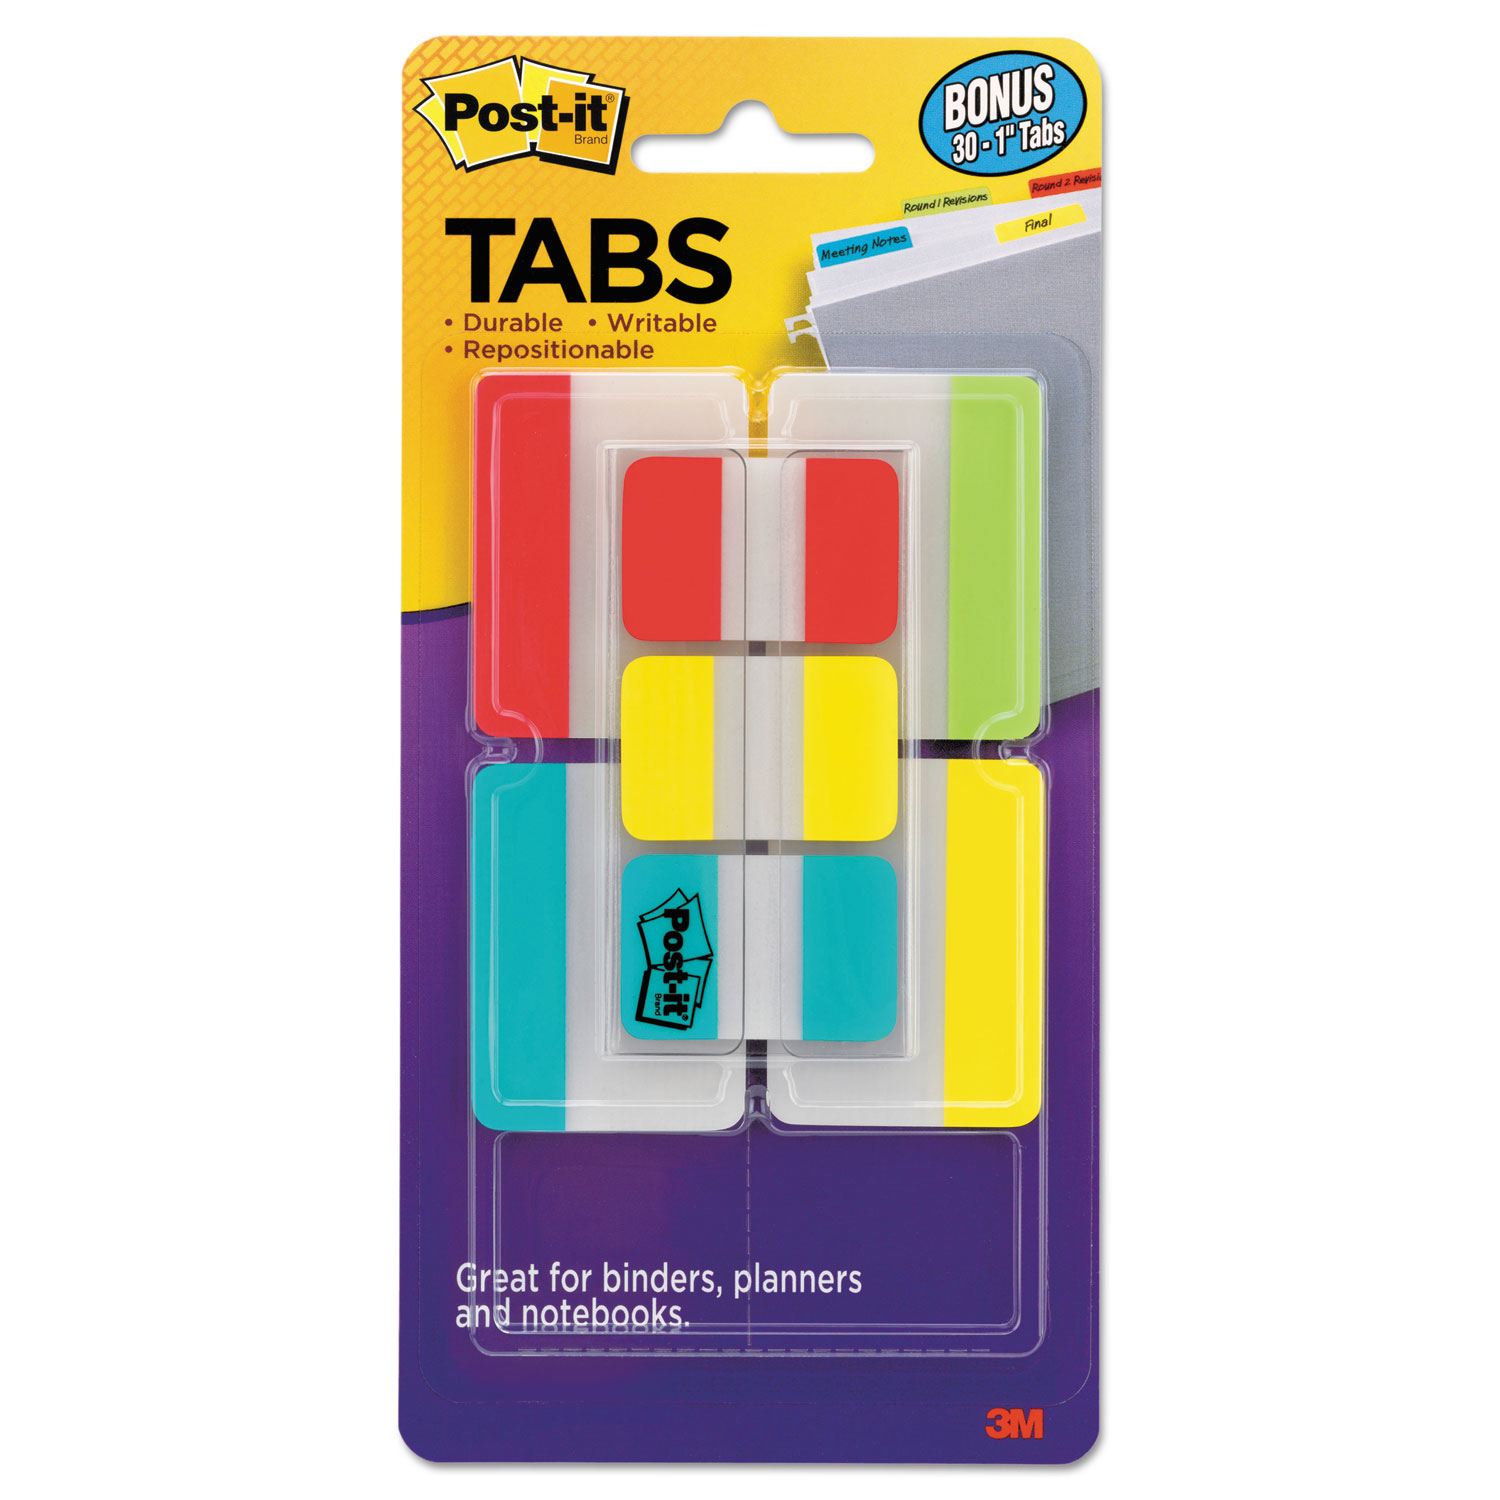  Post-it Tabs 686-VAD2 Tabs Value Pack, 1/5-Cut and 1/3-Cut Tabs, Assorted Colors, 1 and 2 Wide, 114/Pack (MMM686VAD2) 